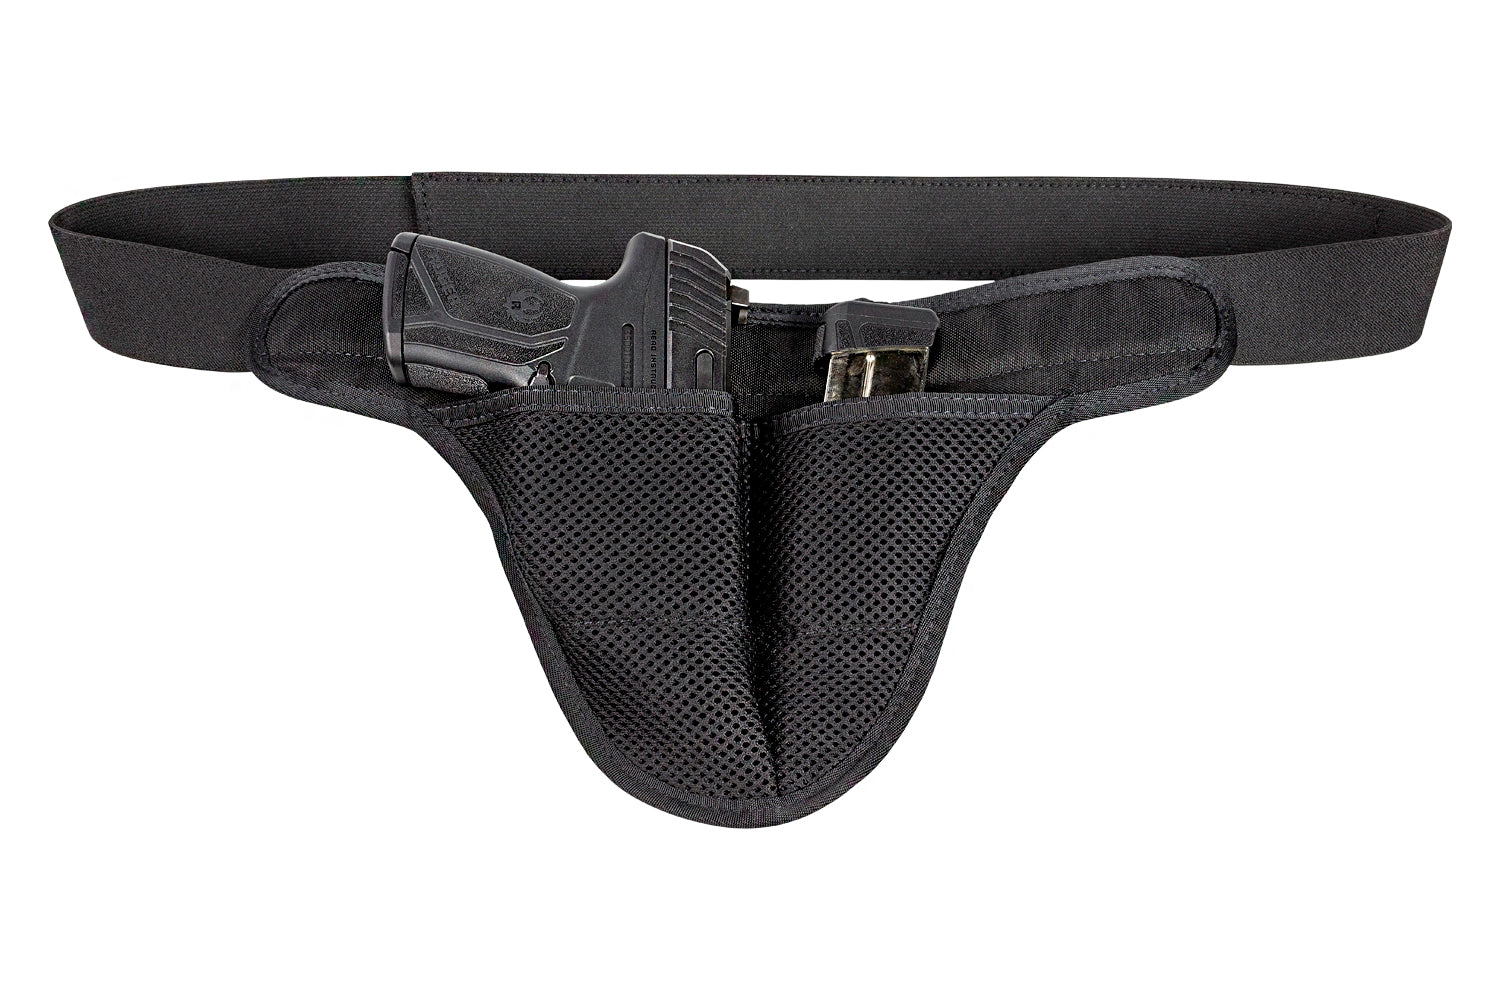 Concealed Carry Crotch Holster